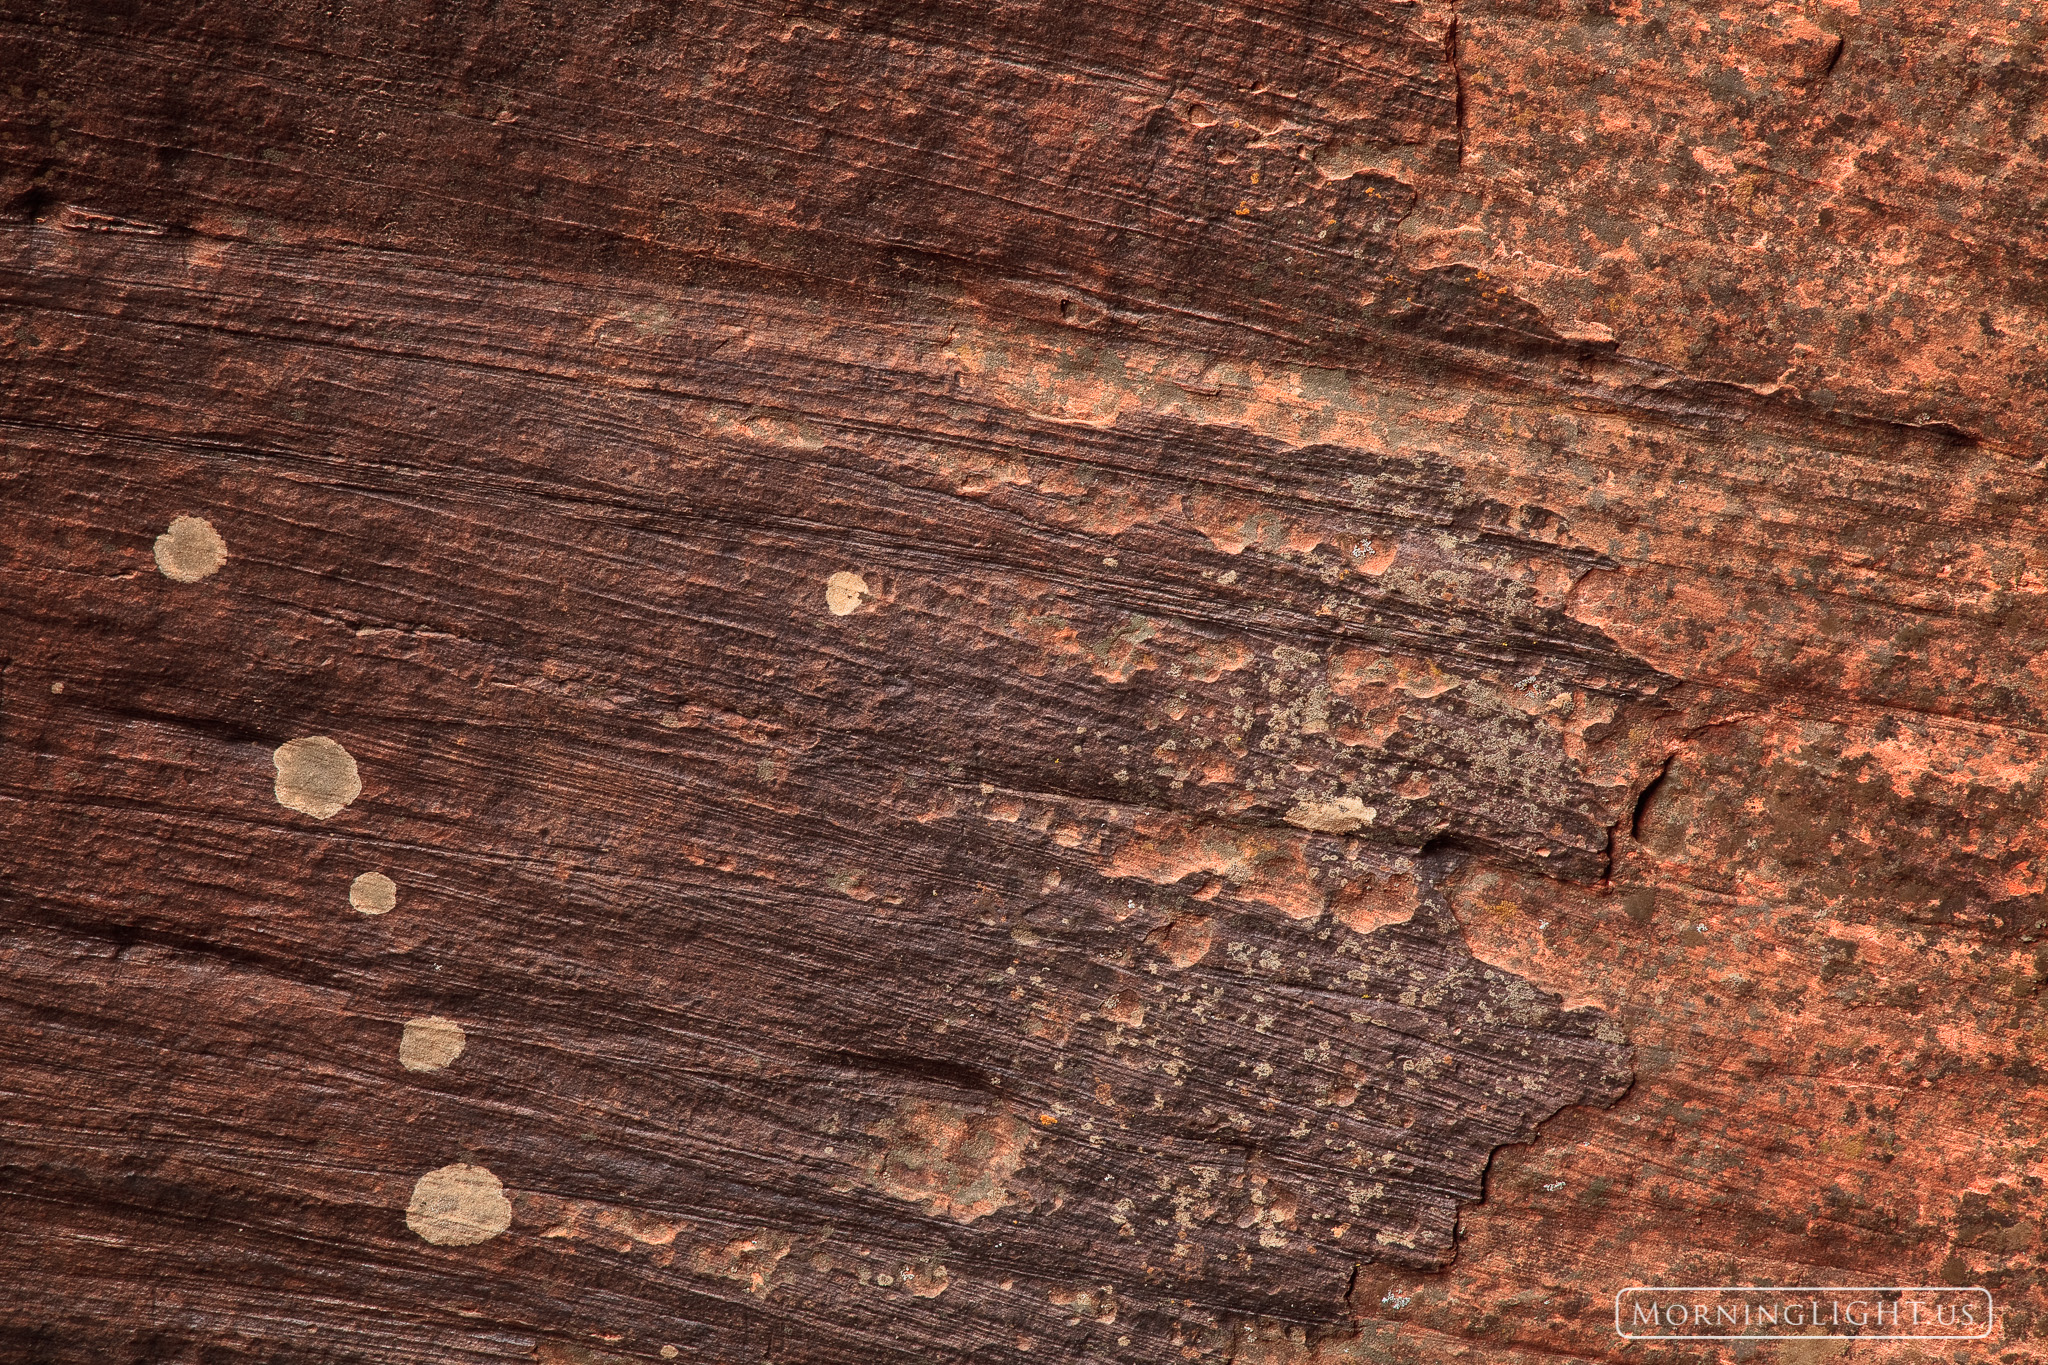 A sandstone wall can often reveal some of the most beautiful abstract images. I could stare at such walls for hours.